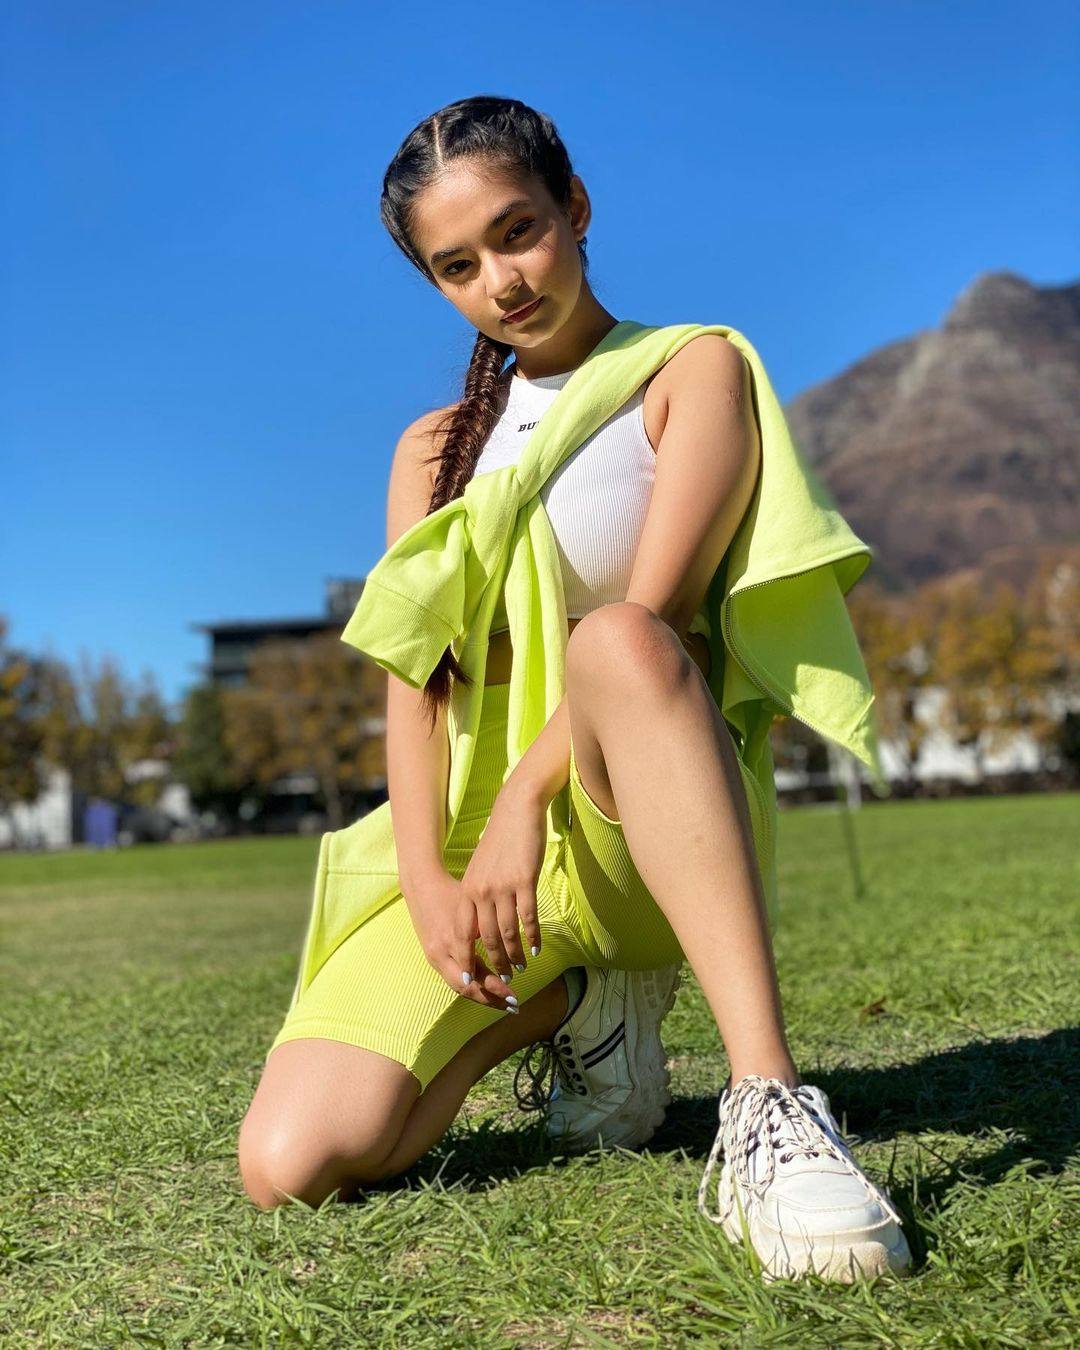 Anushka Sen Xxx Real Sex - Inside Anushka Sen's fitness and beauty routine â€“ the Bollywood actress and  Indian influencer dishes her skin, hair, diet and wellness tips ... and  don't forget me-time! | South China Morning Post